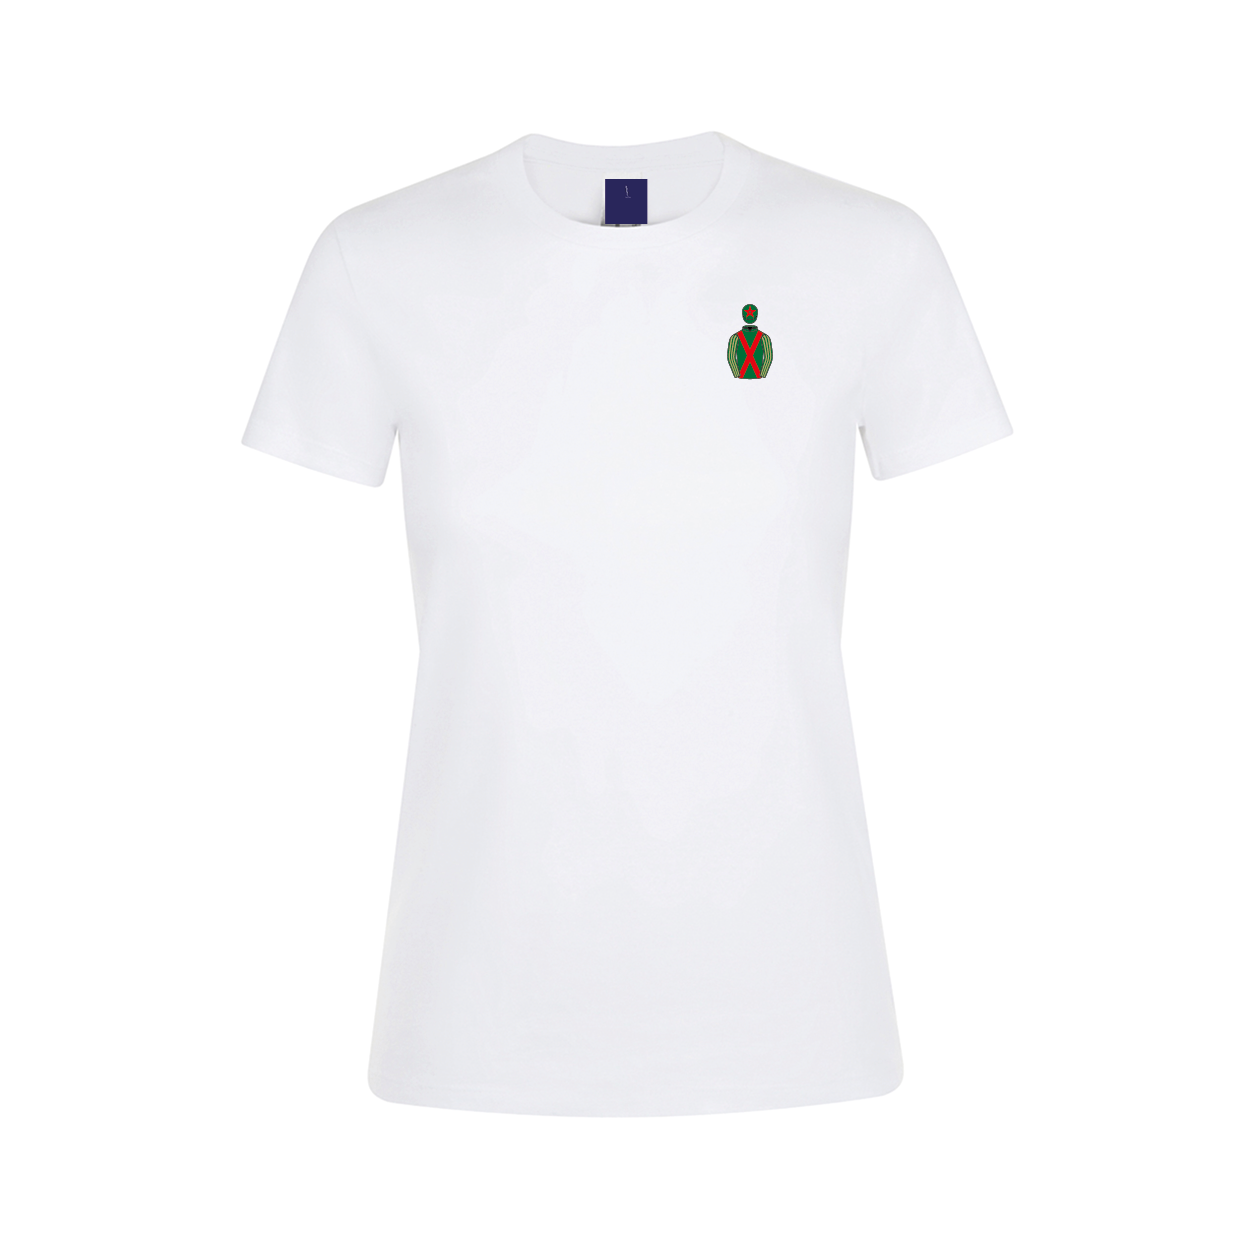 Ladies Prof Caroline Tisdall Embroidered T-Shirt - Clothing - Hacked Up